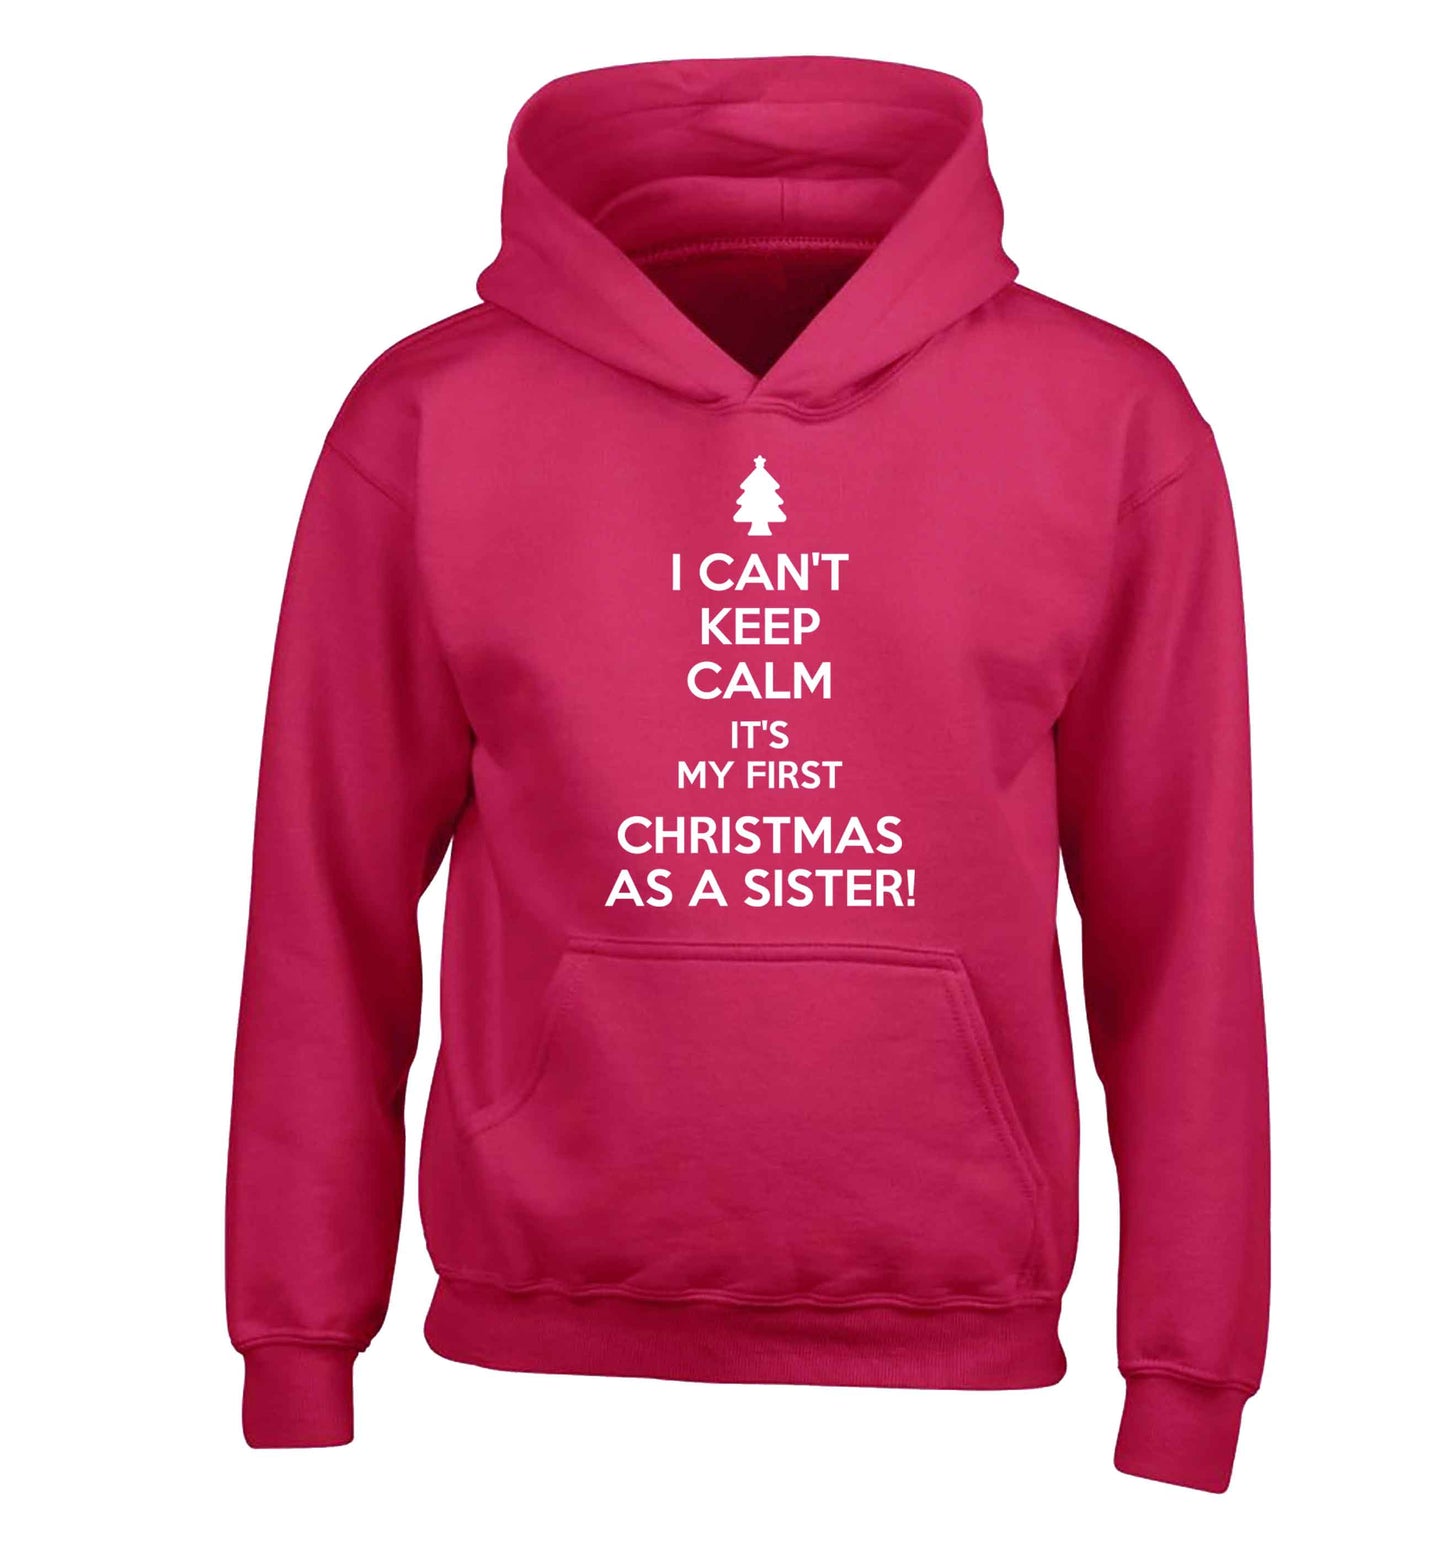 I can't keep calm it's my first Christmas as a sister! children's pink hoodie 12-13 Years